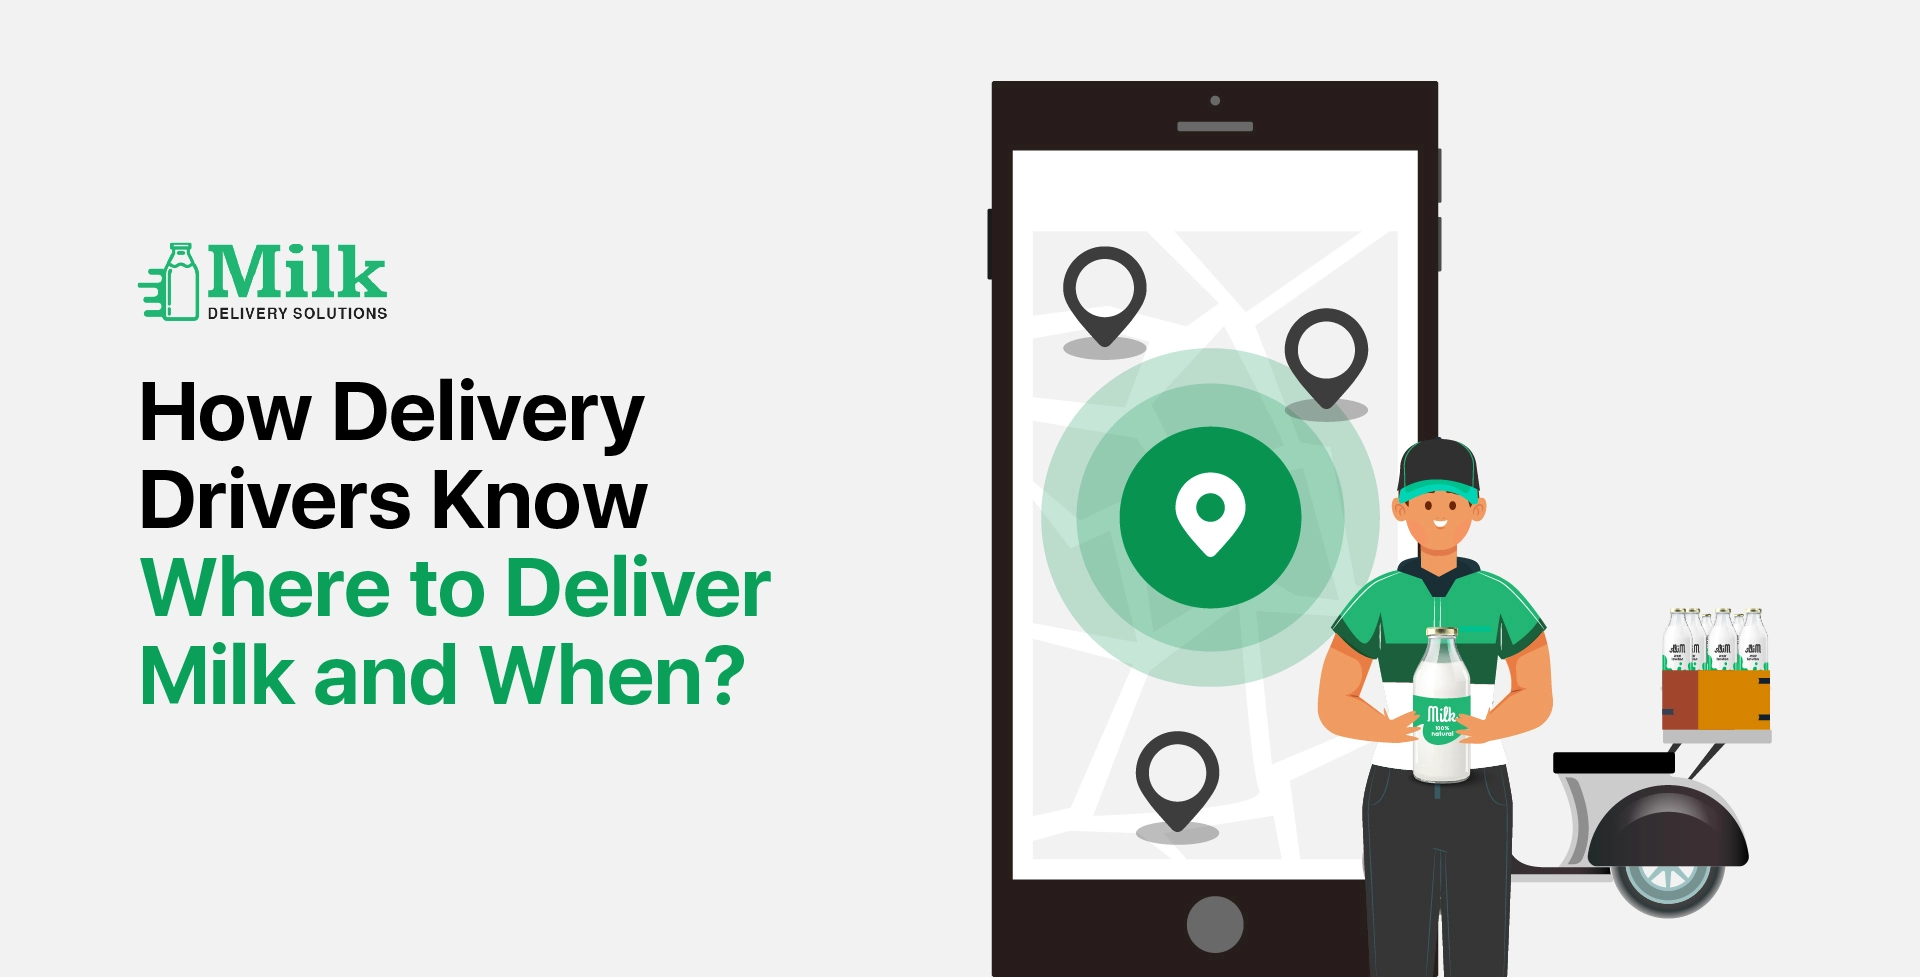 ravi garg, mds, delivery drivers, milk delivery, dairy, deliveries 